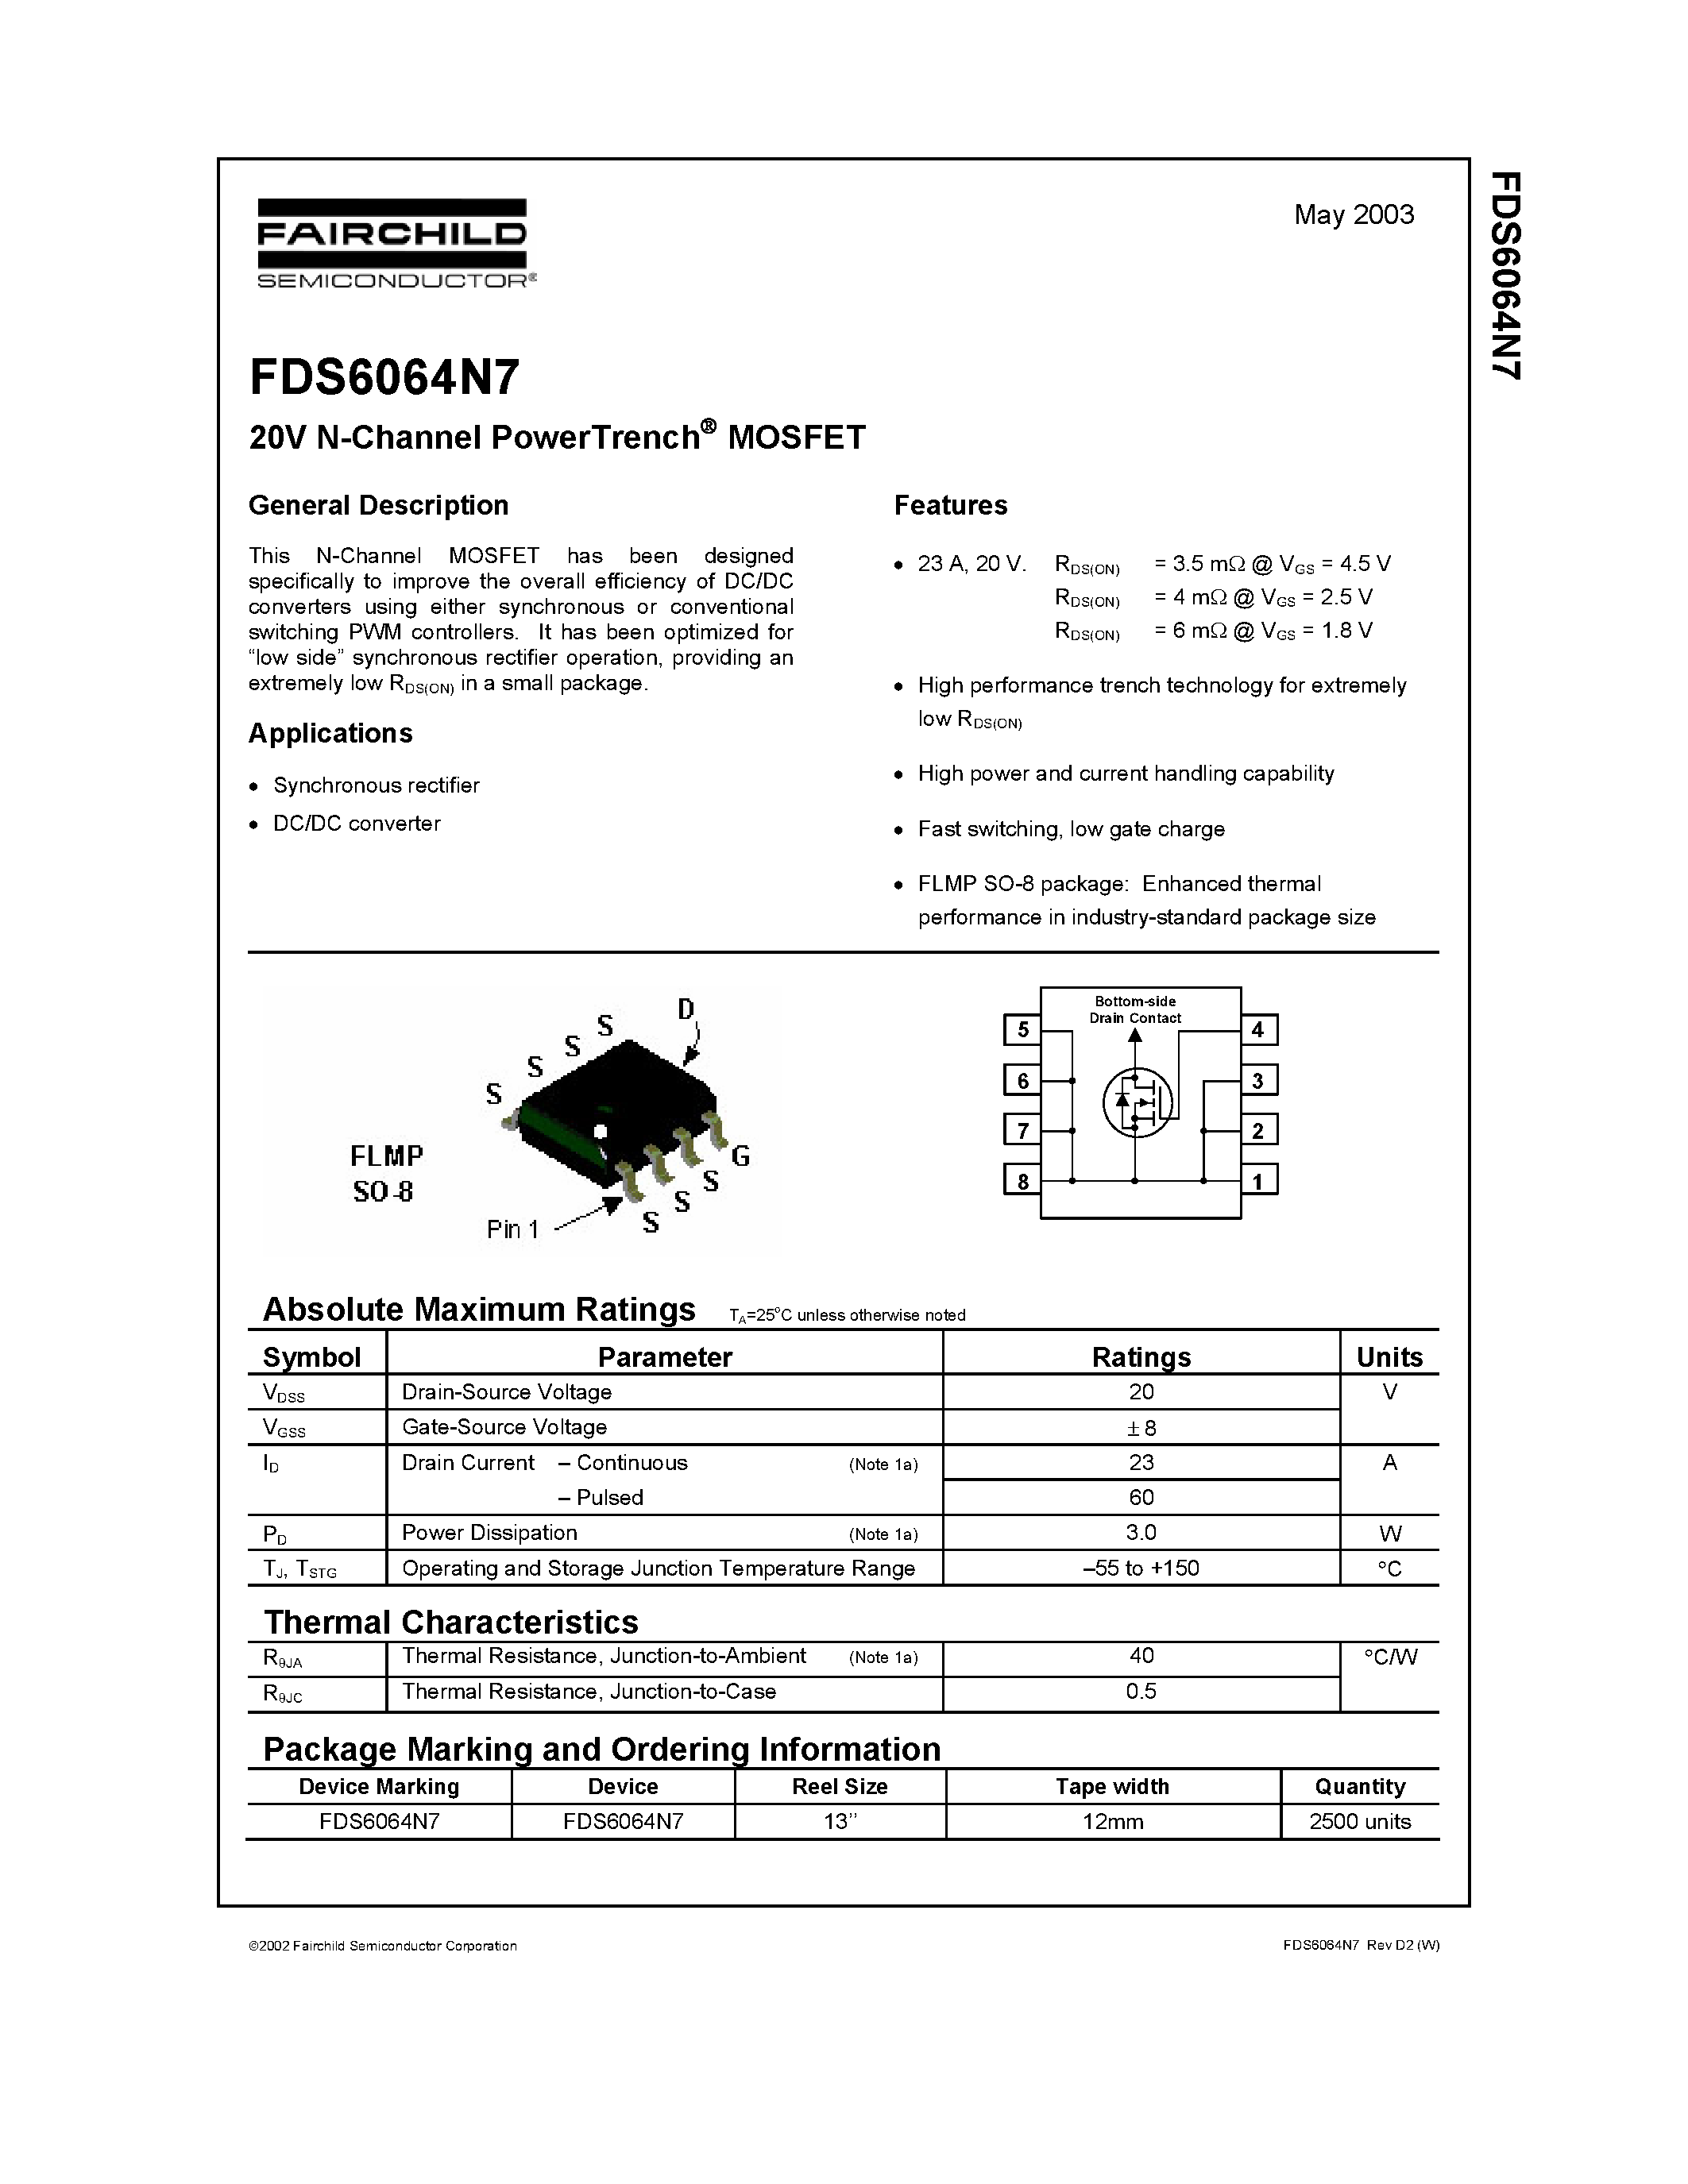 Datasheet FDS6064N7 - 20V N-Channel PowerTrench MOSFET page 1